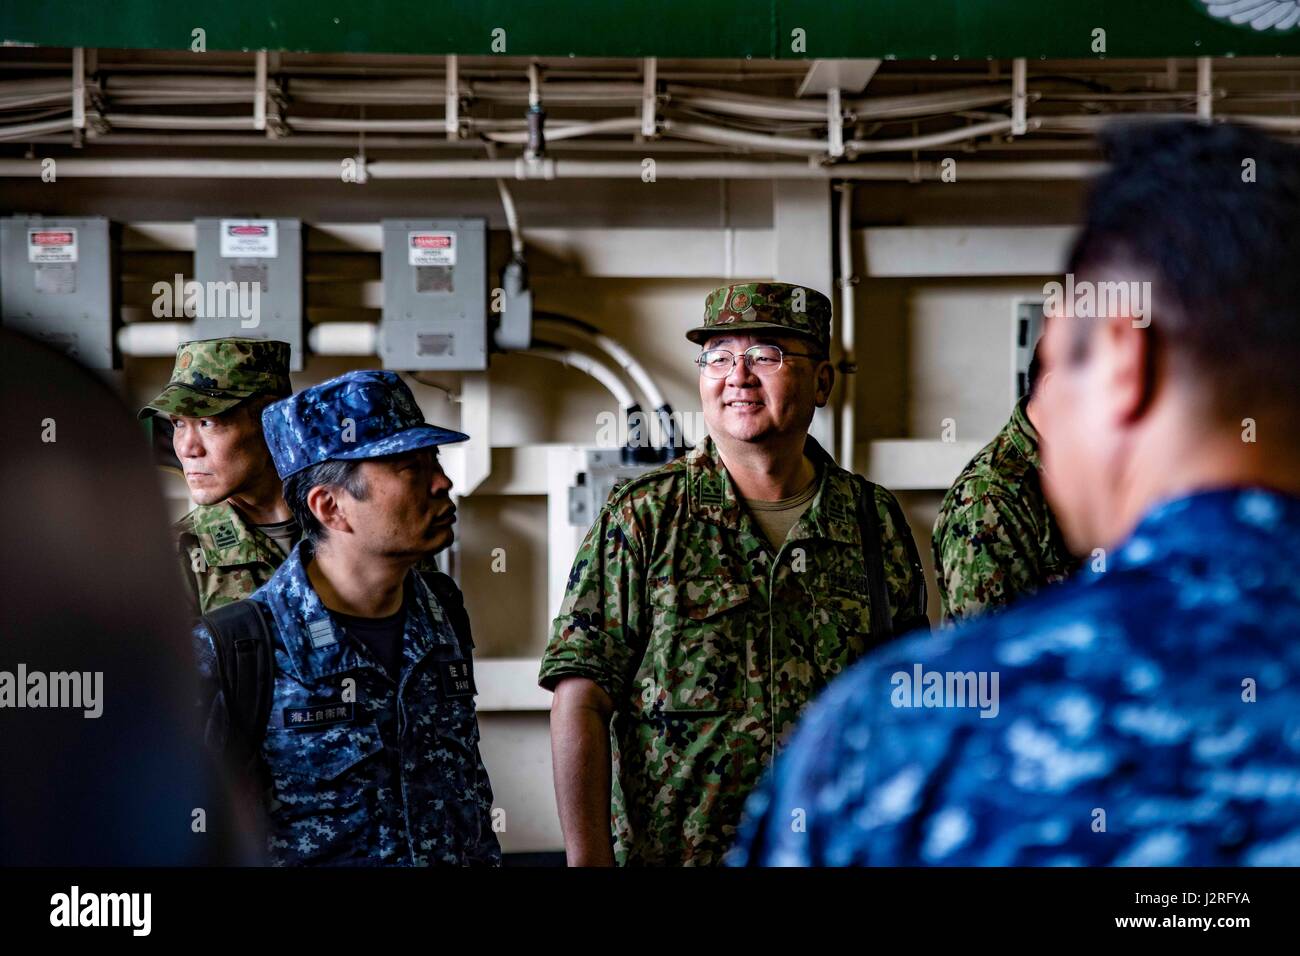 170427-N-JH293-038 SASEBO, Japan (April 27, 2017) Japan Self-Defense Force (JSDF) personnel take a tour of the amphibious transport dock USS Green Bay’s (LPD 20) hangar bay. Green Bay and other ships and units of Commander, Amphibious Force 7th Fleet, routinely partner with the JSDF to increase mutual understanding and interoperability to further strengthen the U.S.-Japan Alliance. (U.S. Navy photo by Mass Communication Specialist 1st Class Chris Williamson/Released) Stock Photo